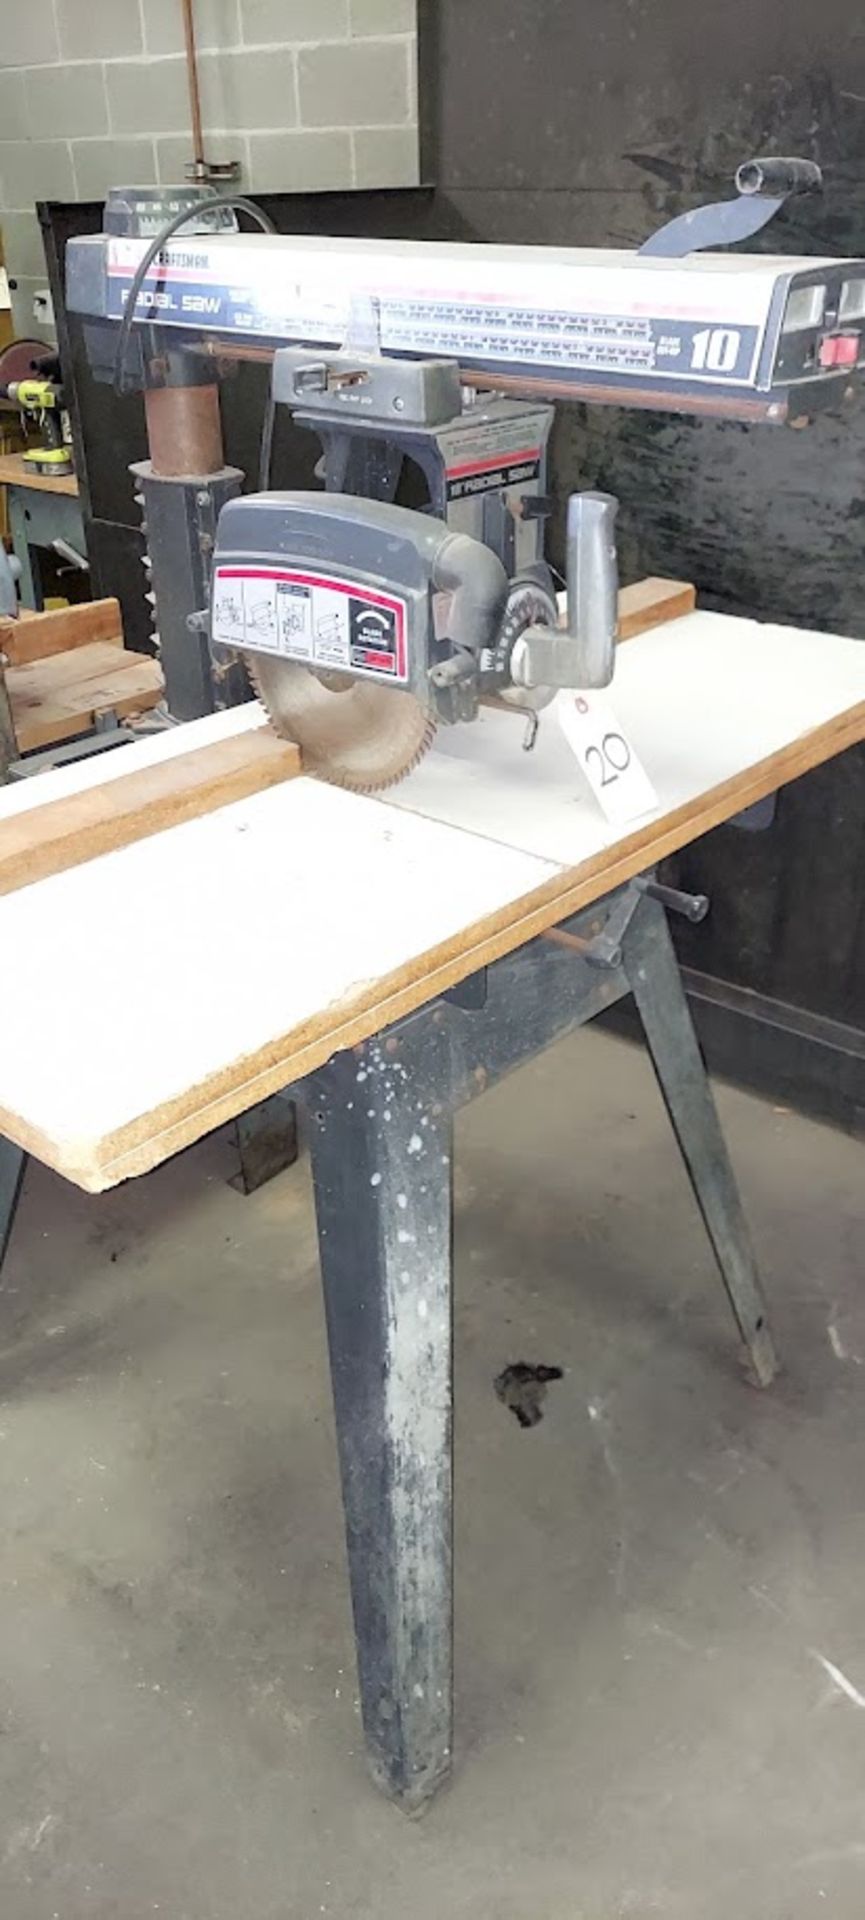 Sears Craftsman 10" Radial Arm Saw, Motor is 120/240 Volts 1ph